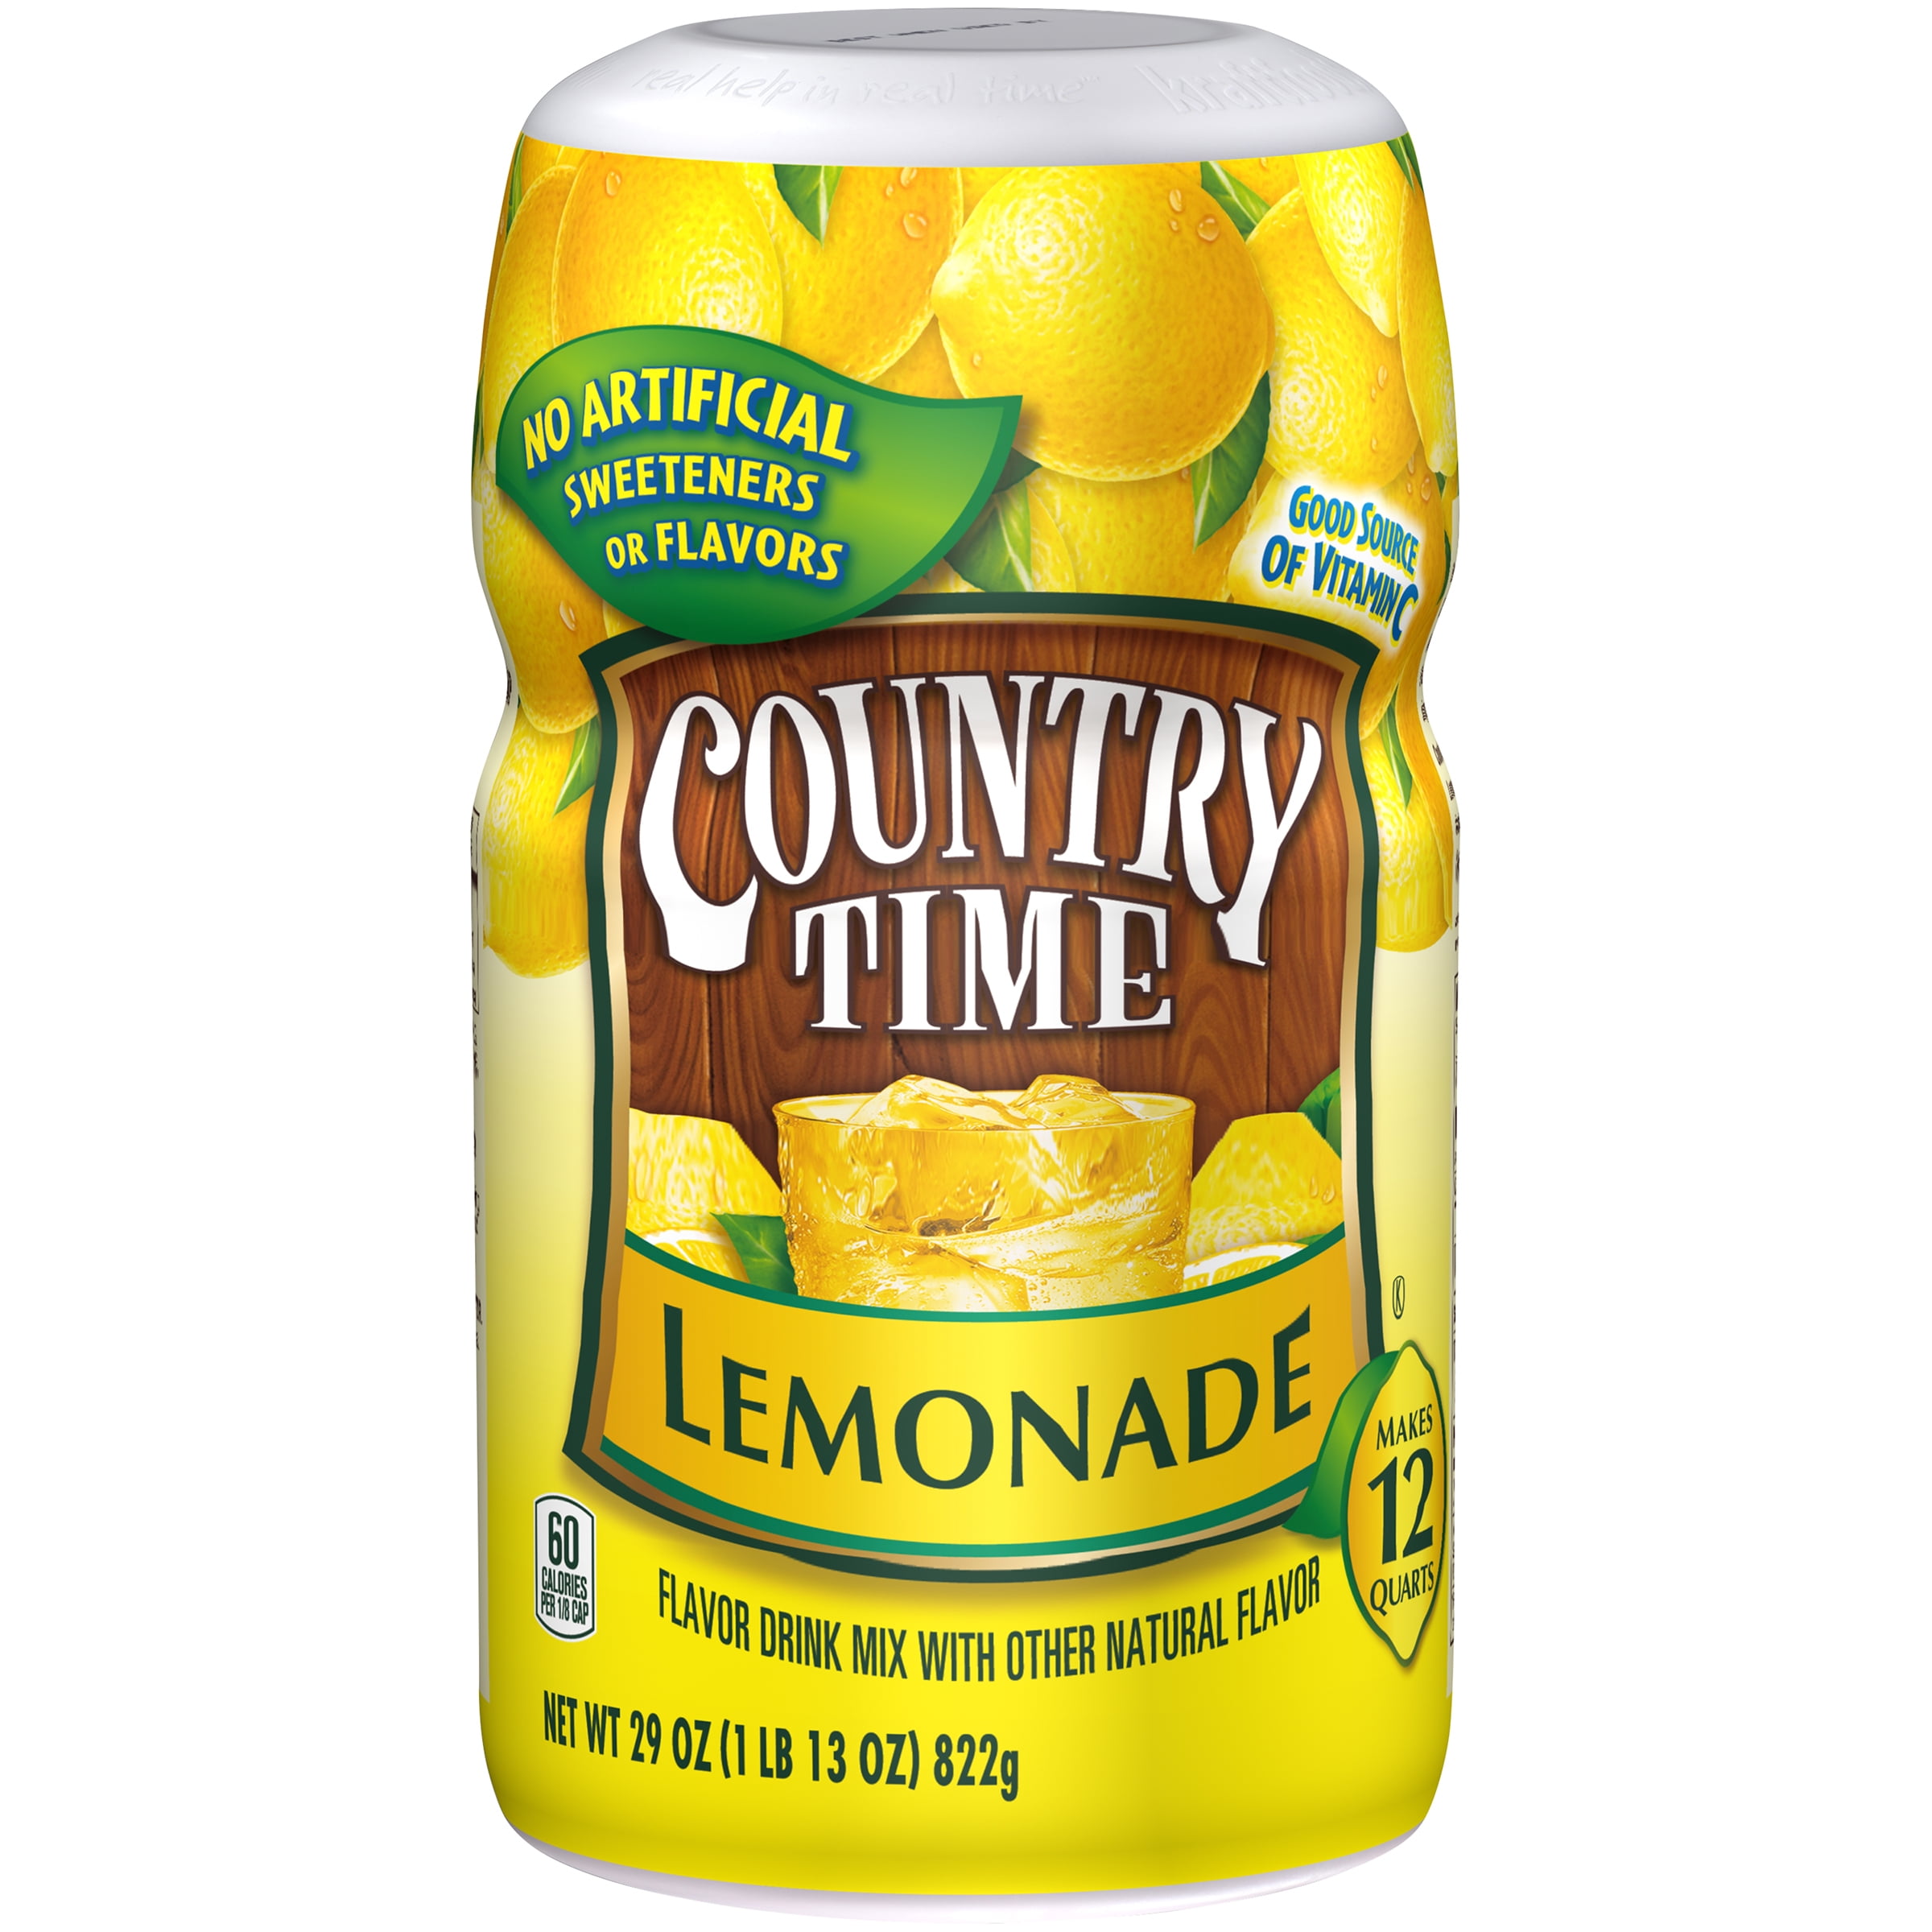 COUNTRY TIME LEMONADE DRINK MIX RECIPES